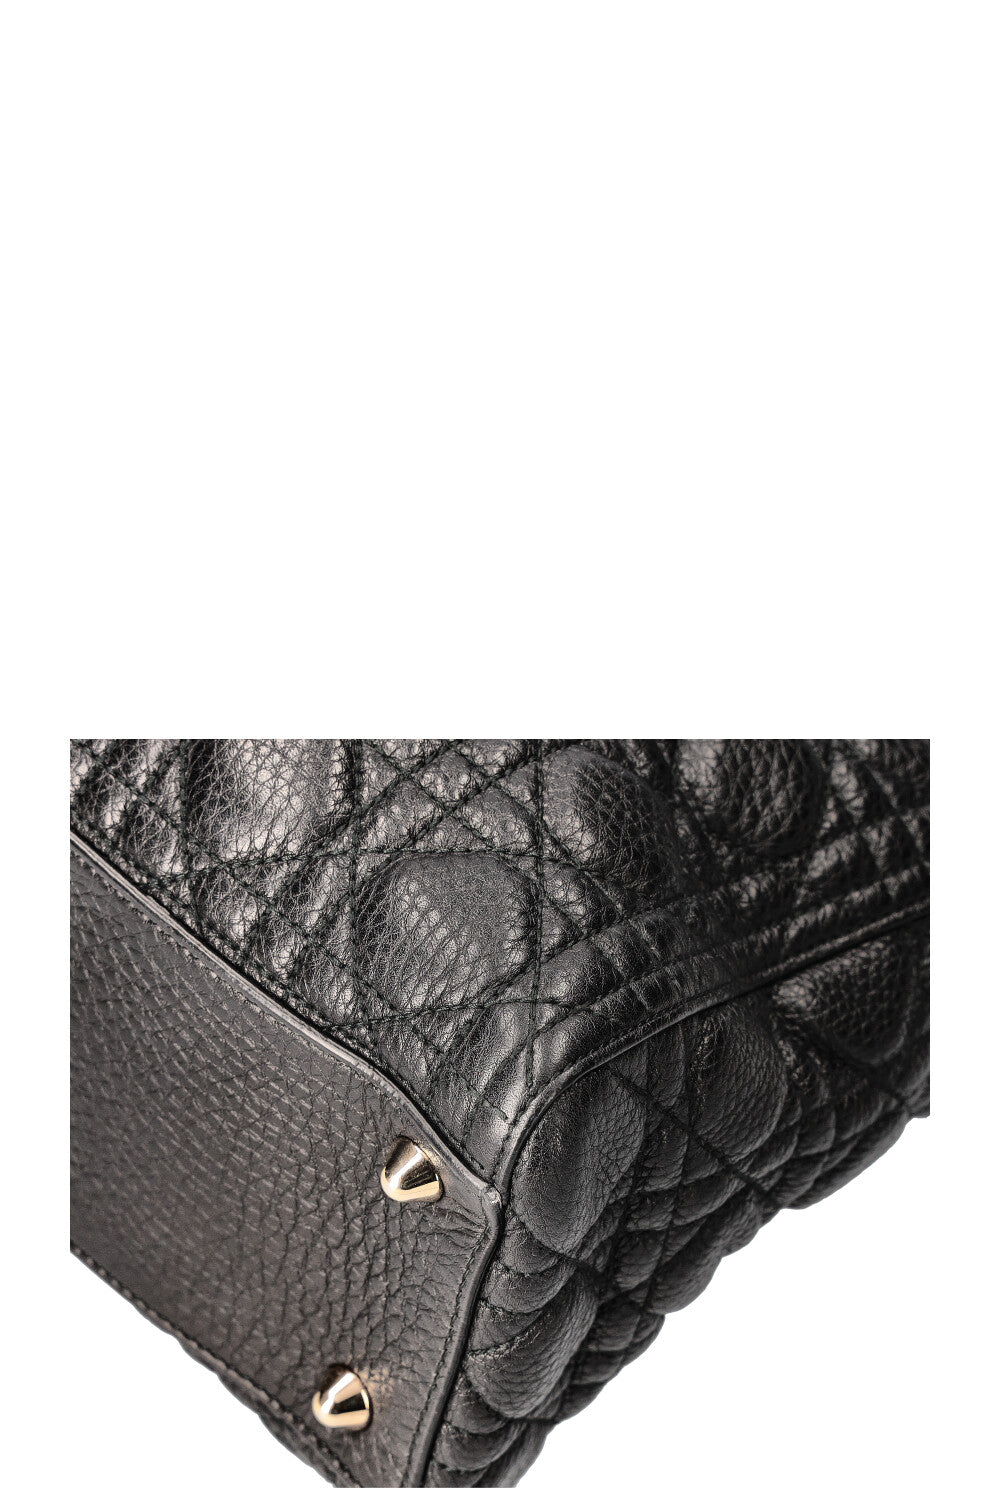 CHRISTIAN DIOR Lady Dior Bag Quilted Grained Calfskin Black